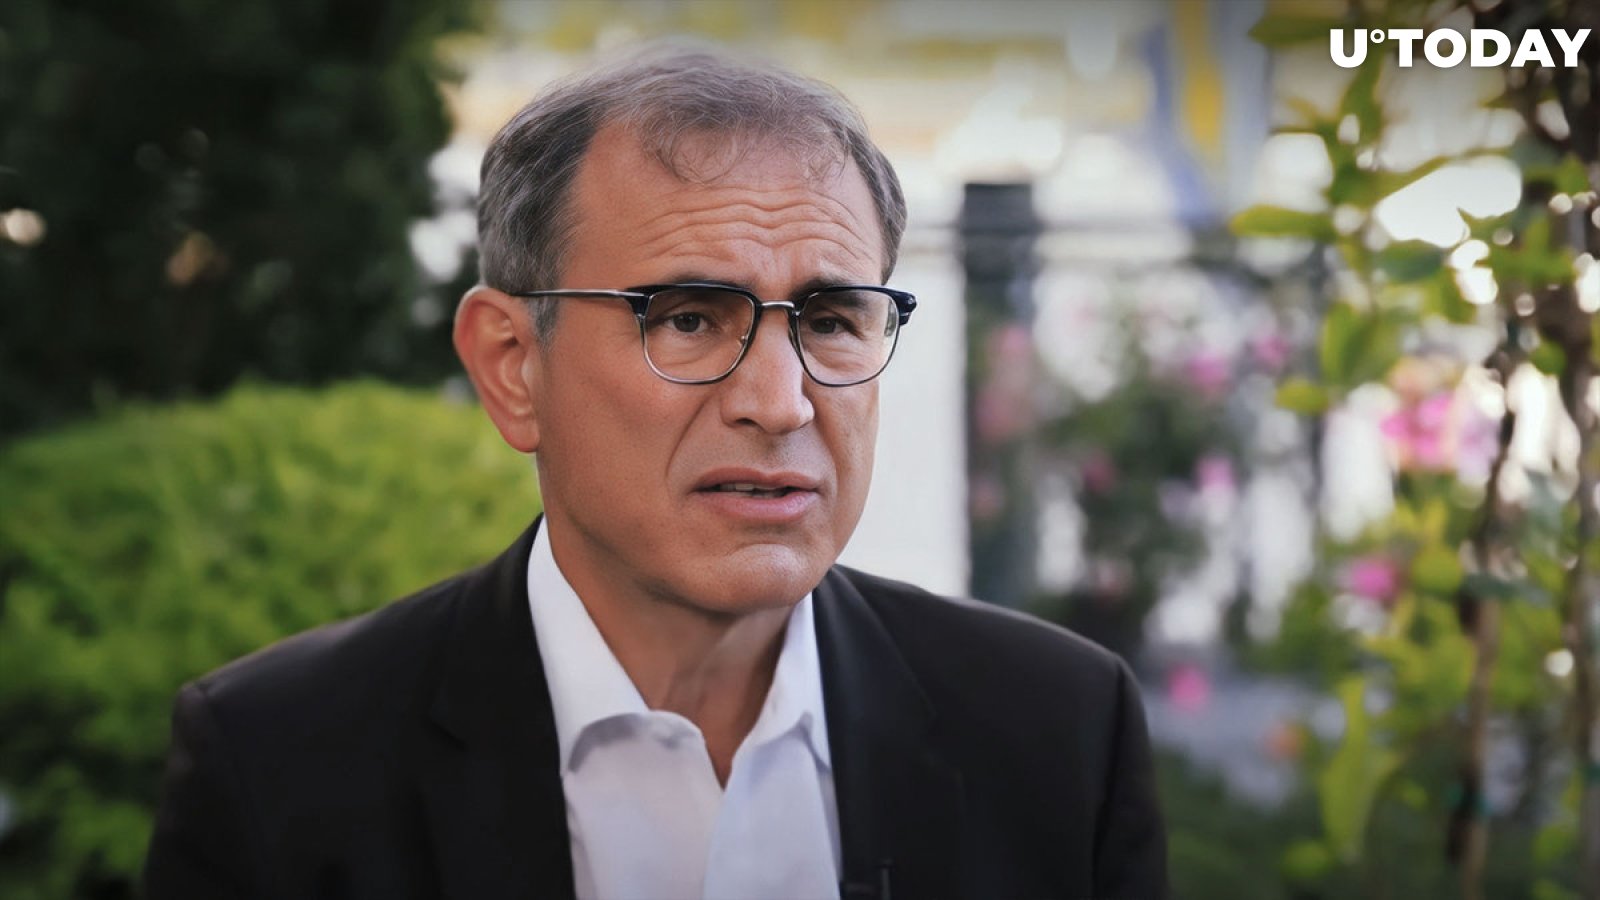 Crypto Hater Roubini Says He Is Not Attacking CZ of Binance, But There's a Catch